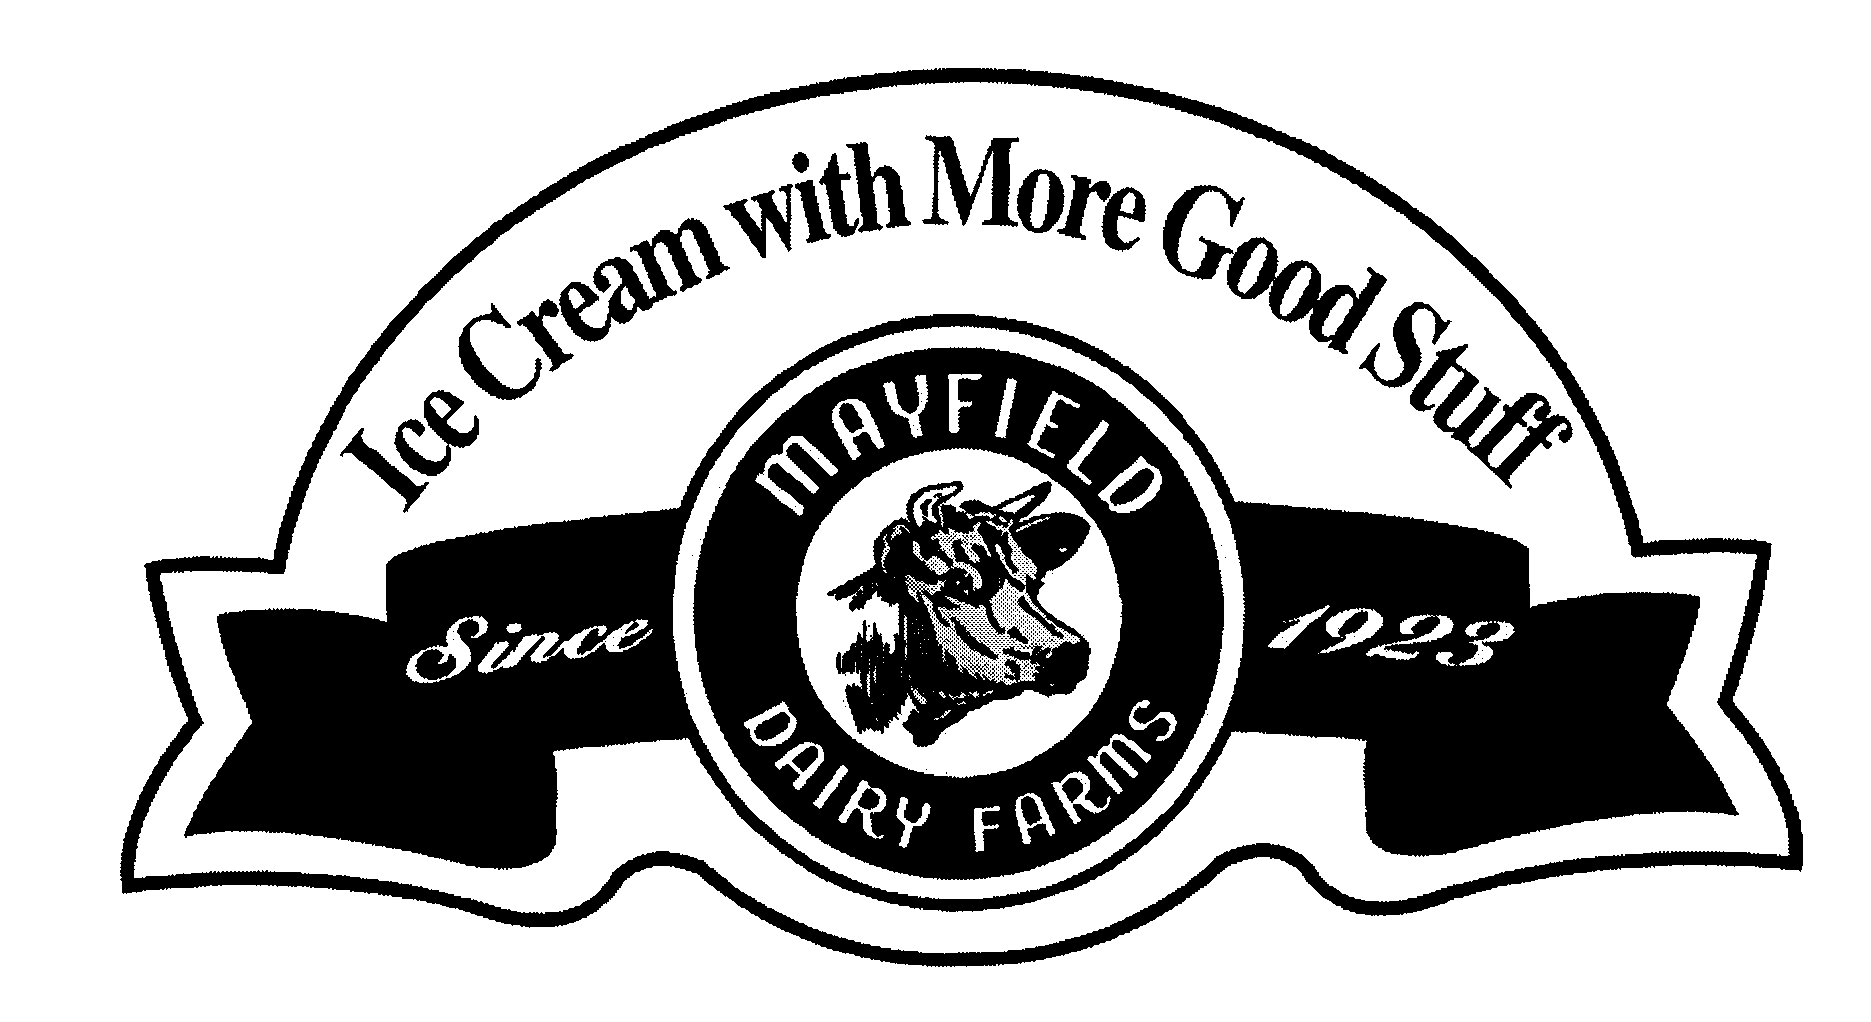  ICE CREAM WITH MORE GOOD STUFF MAYFIELDDAIRY FARMS SINCE 1923